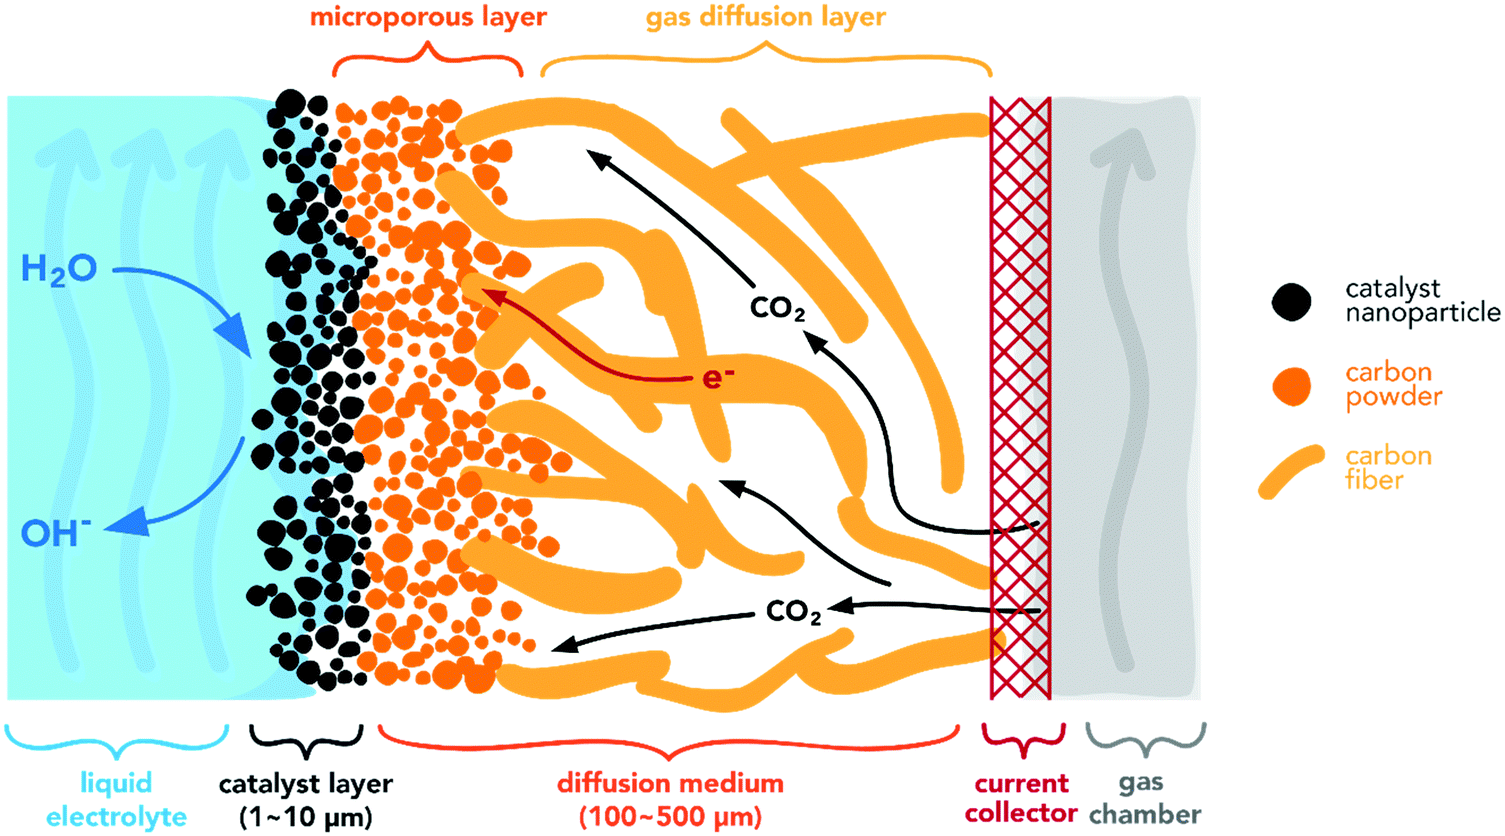 Of co2 mass reduced 